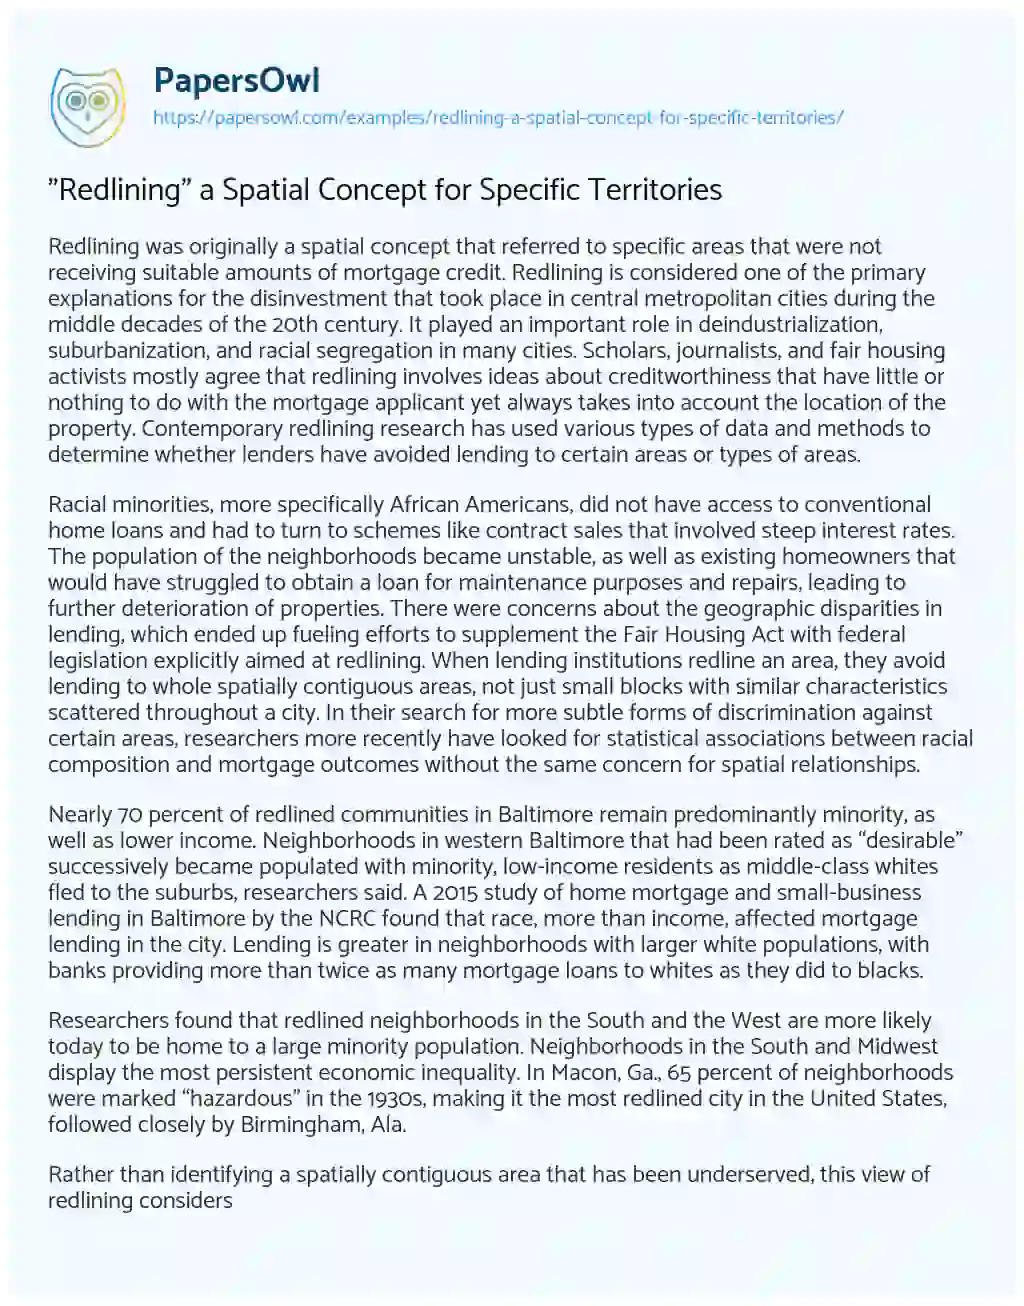 Essay on “Redlining” a Spatial Concept for Specific Territories